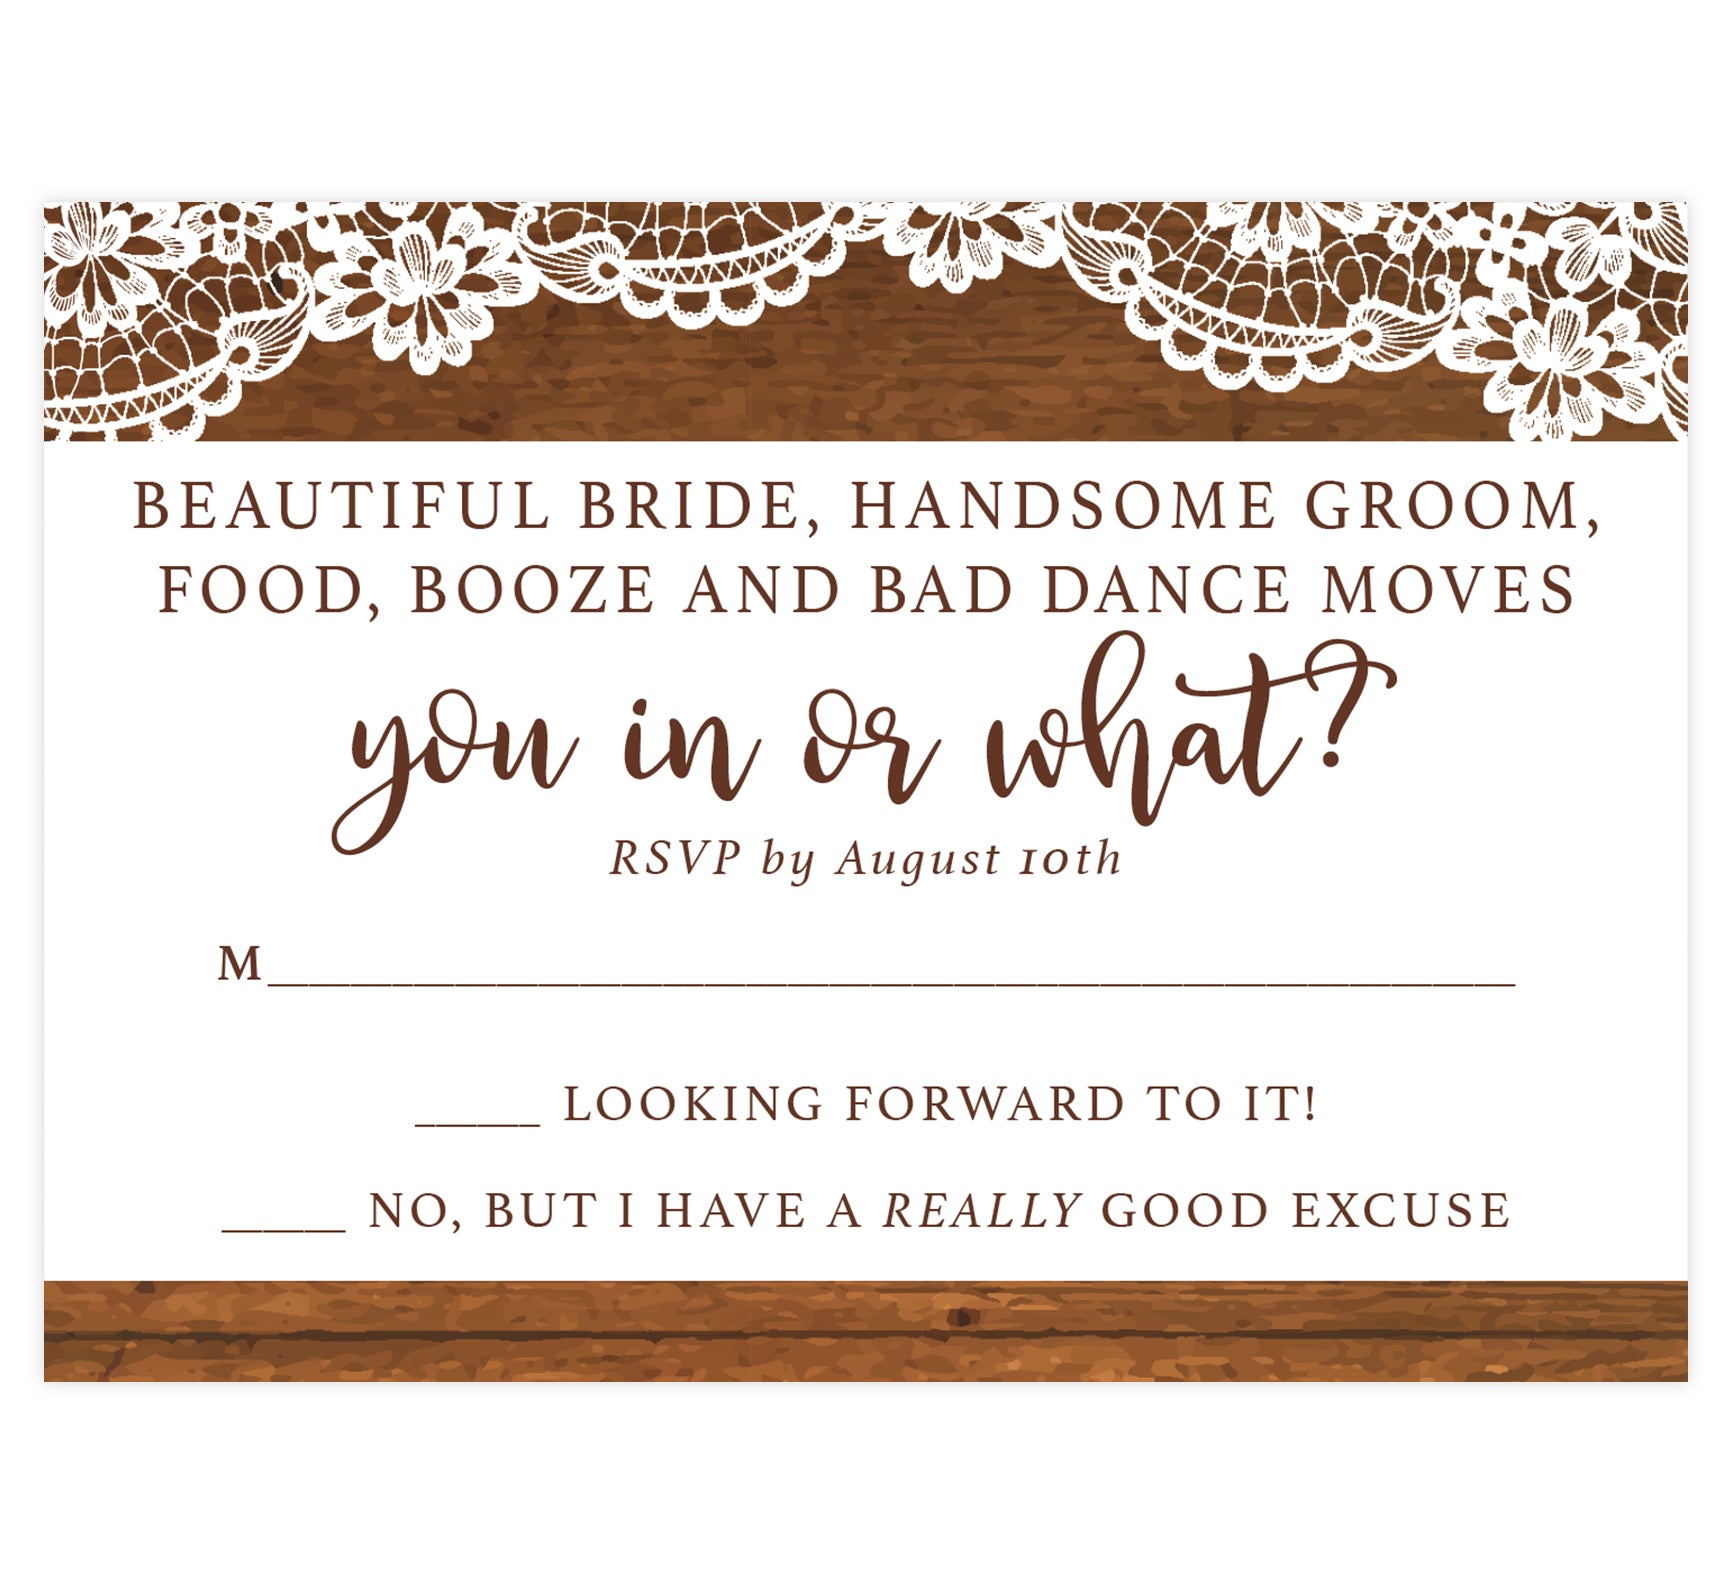 Rustic Glow Wedding Invitation; wood on the top and bottom edges with lace on the top and brown text